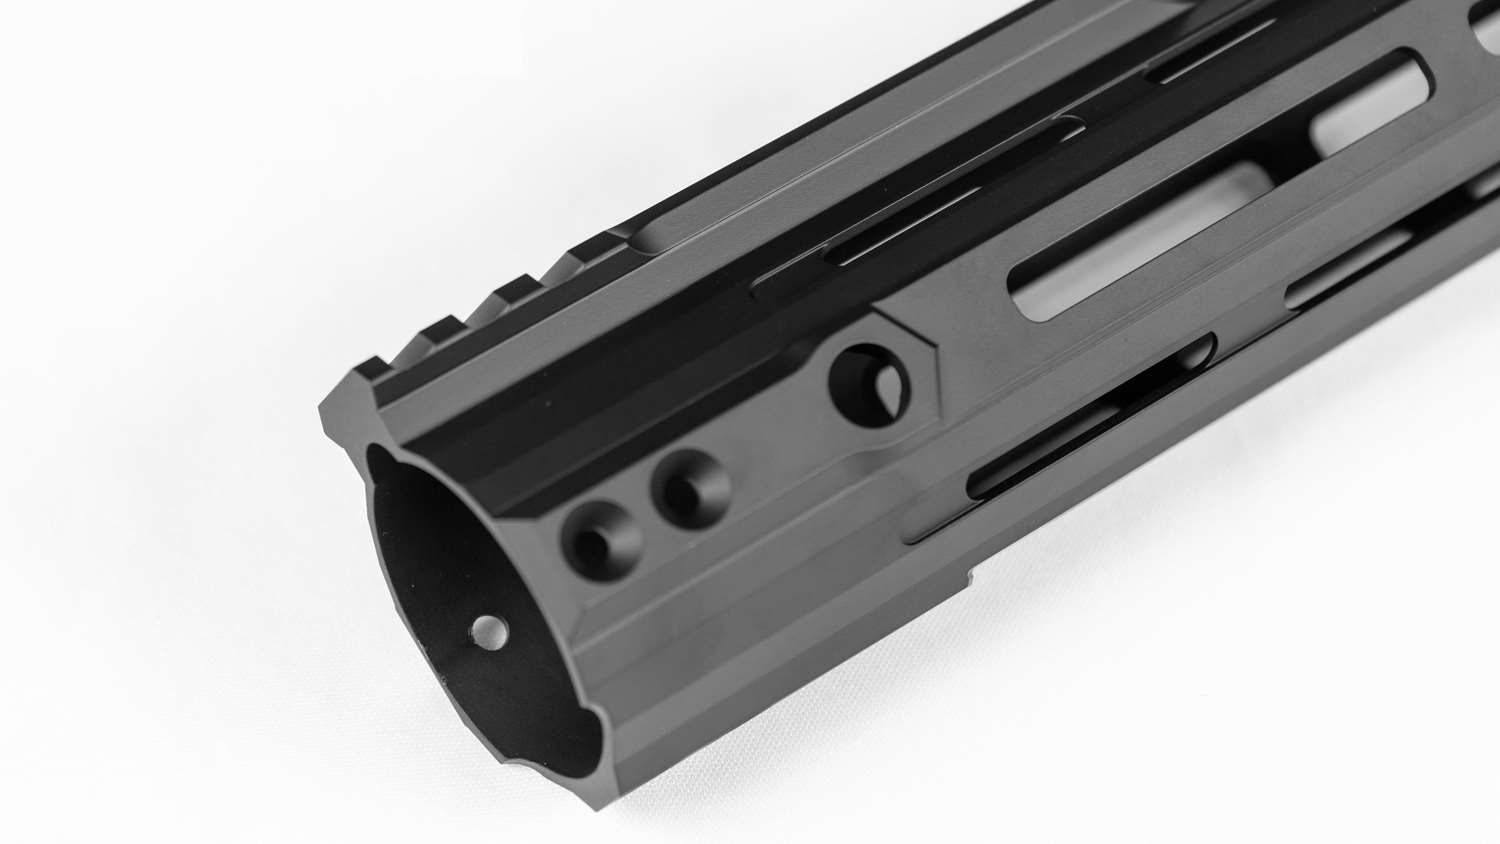 Extra rail length where the handguard meets the receiver